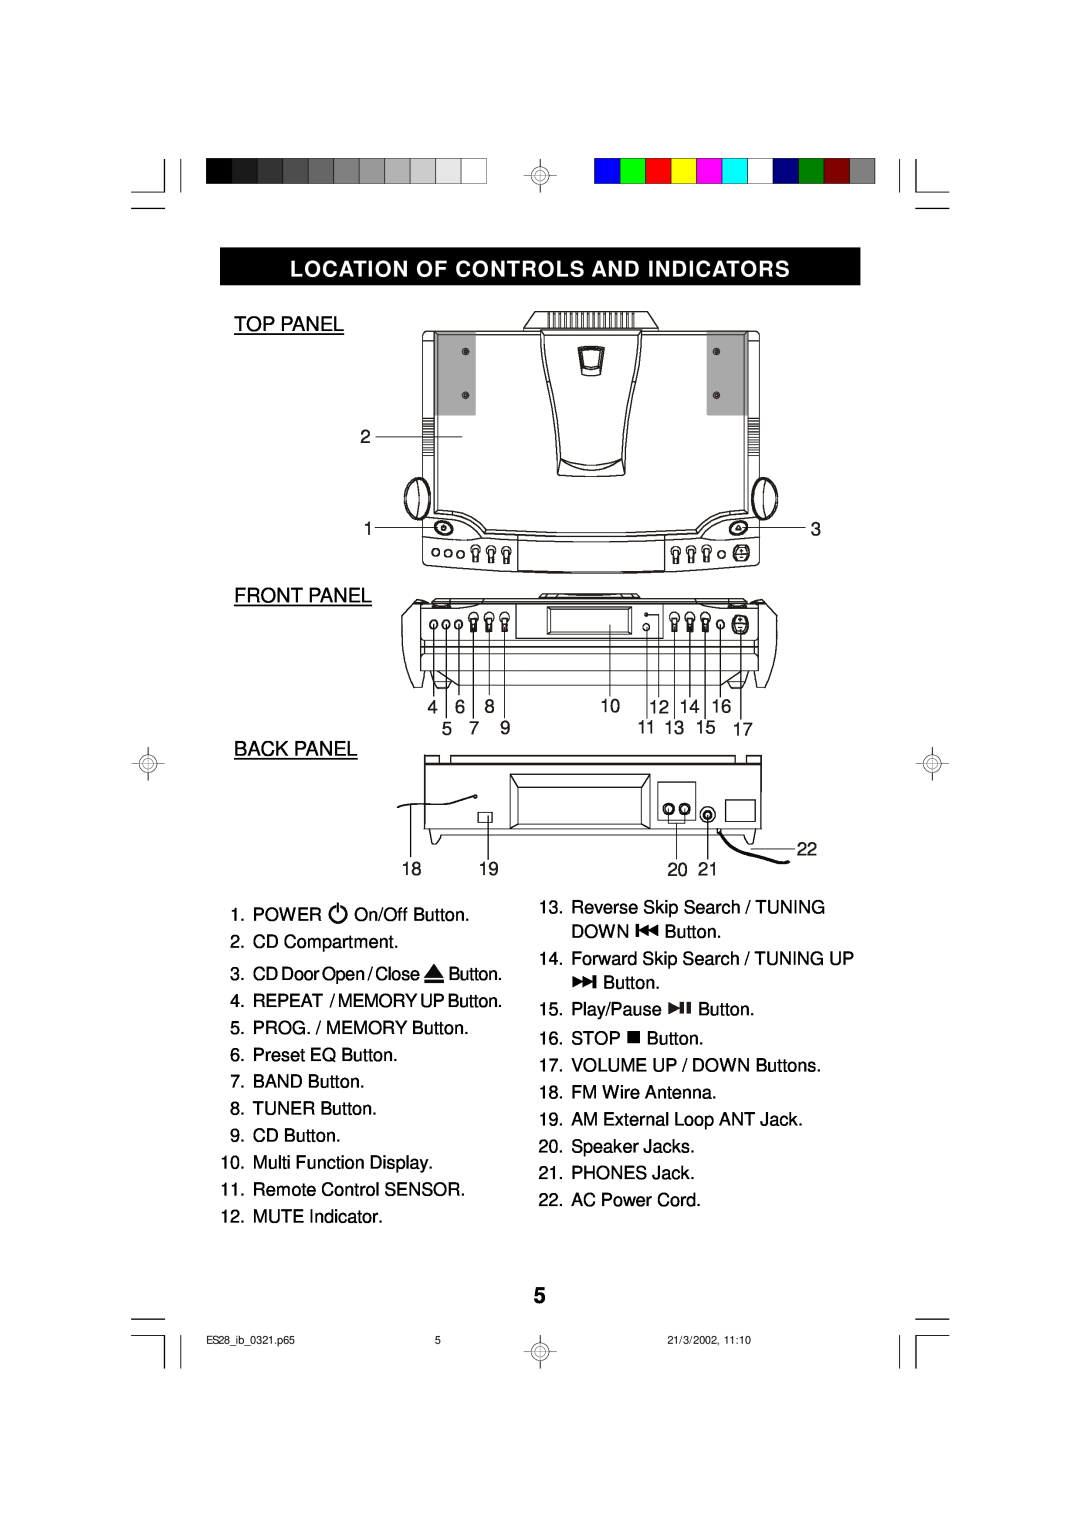 Emerson ES28 owner manual Location Of Controls And Indicators, Top Panel, Front Panel Back Panel 